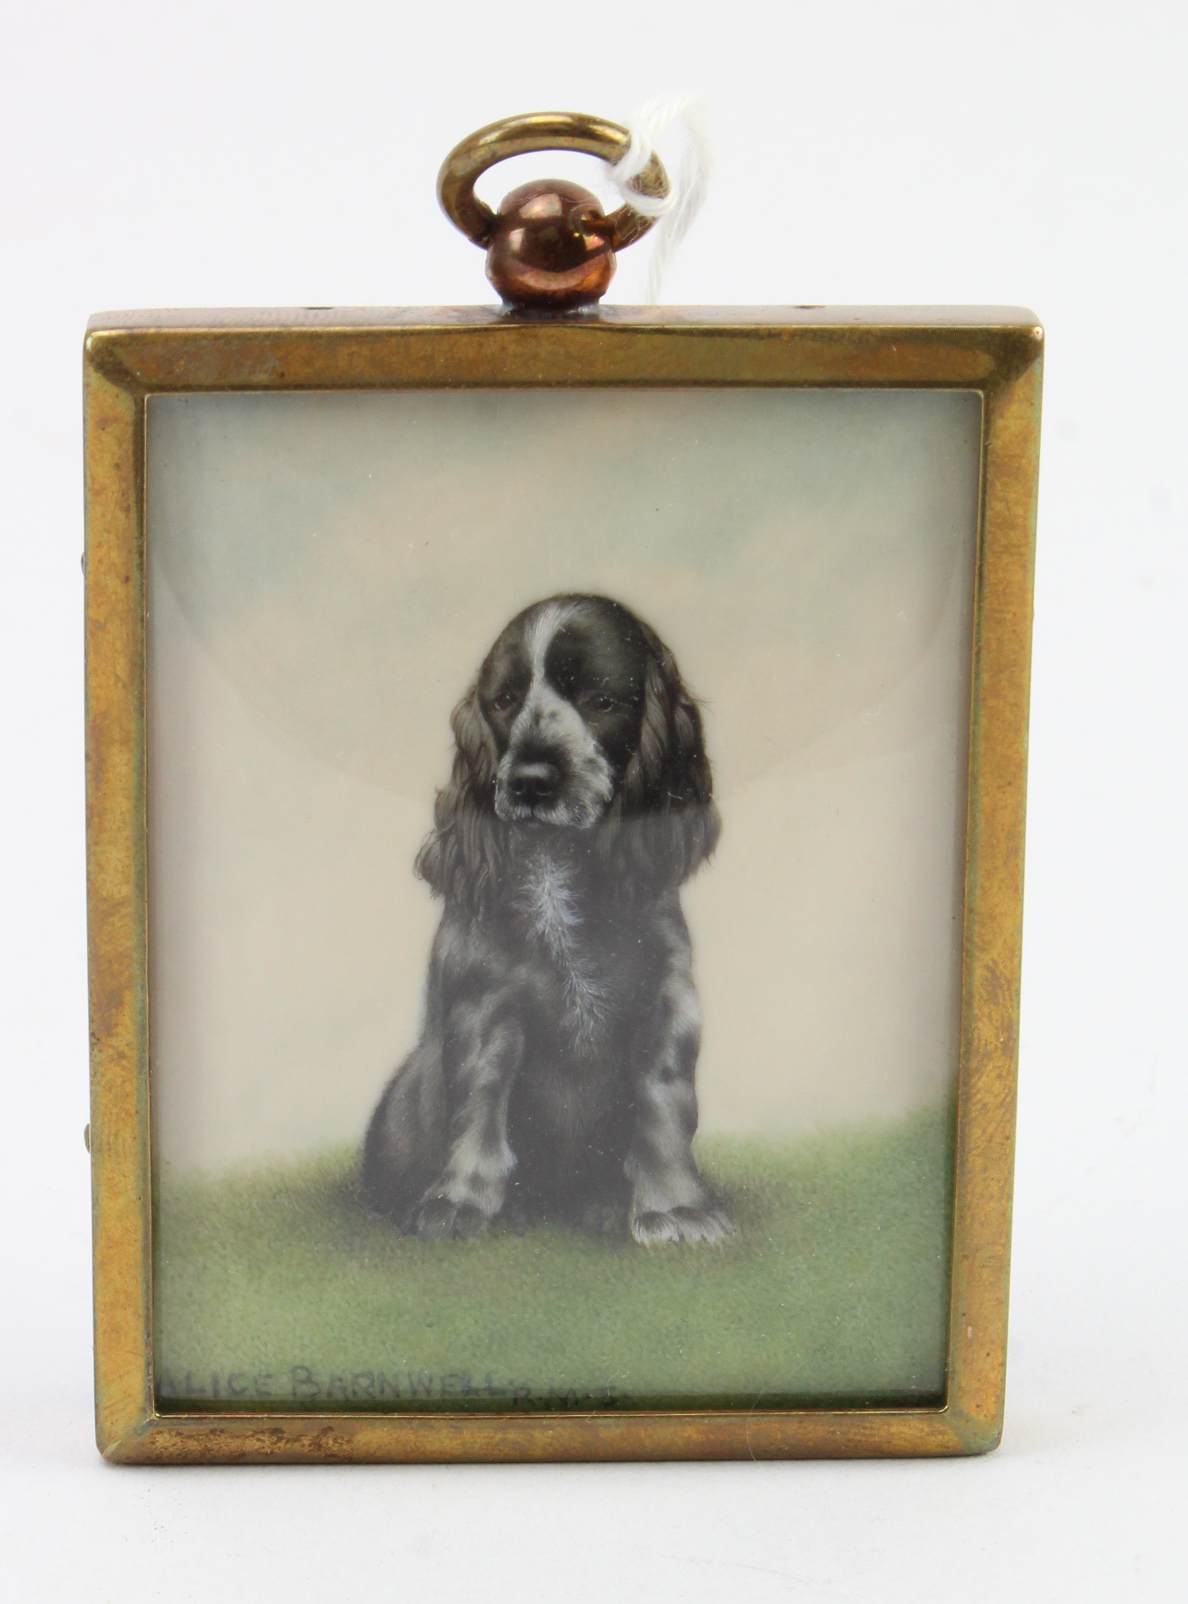 Alice Barnwell (R.M.S). Portrait miniature of a Spaniel dog, signed by artist to lower left, image